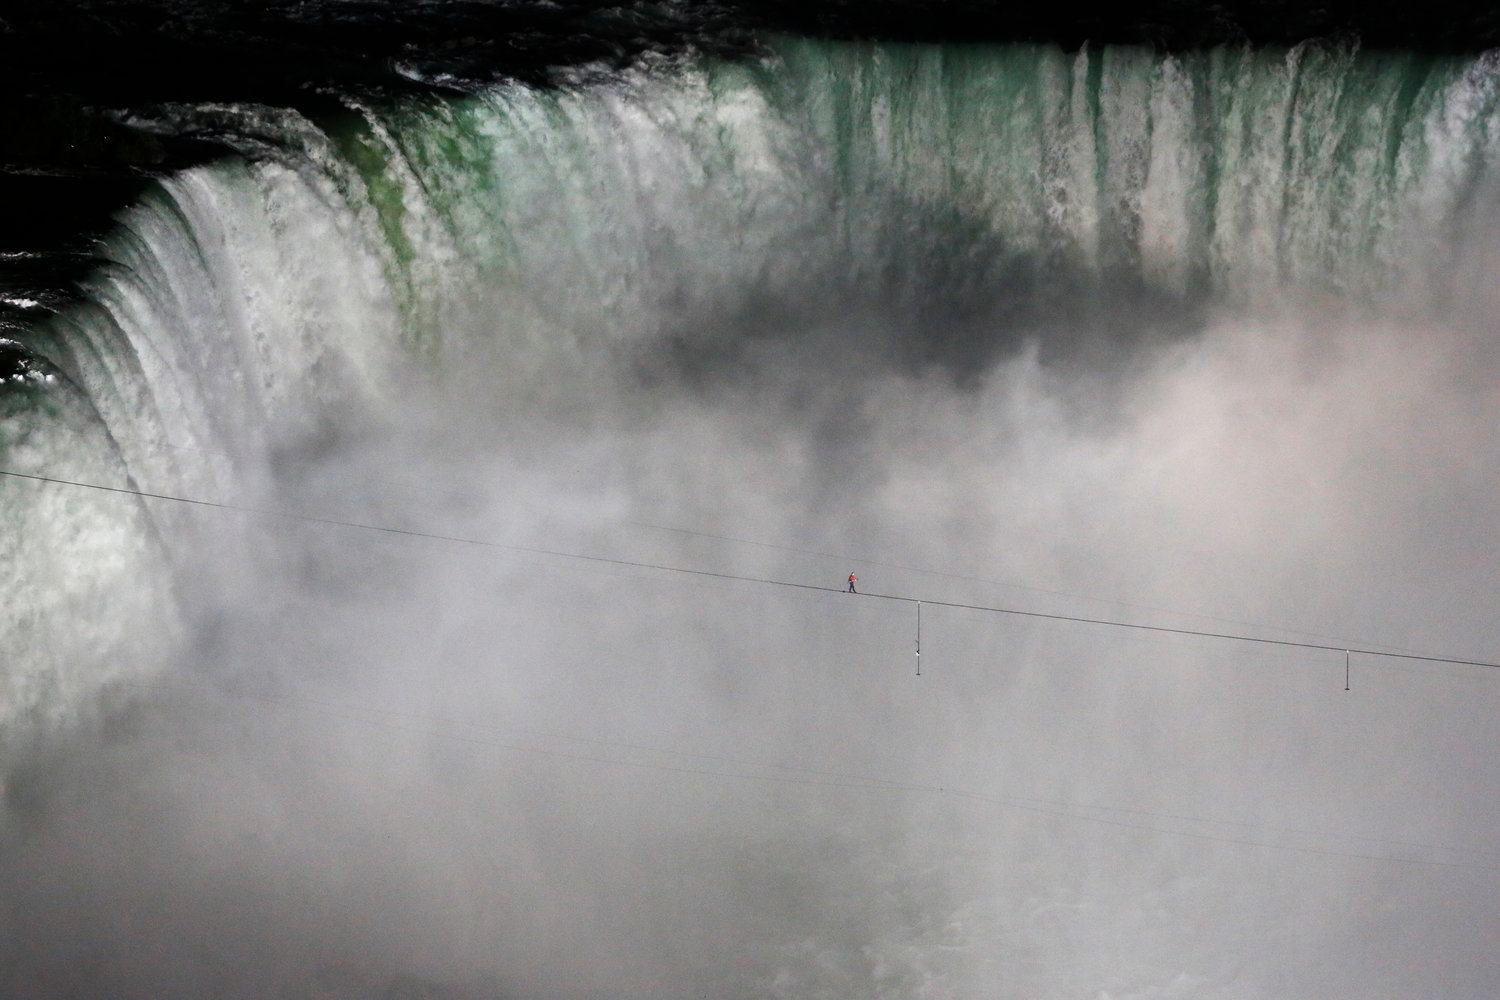 Nik Wallenda is best known for walking a tight rope over Niagara Falls.